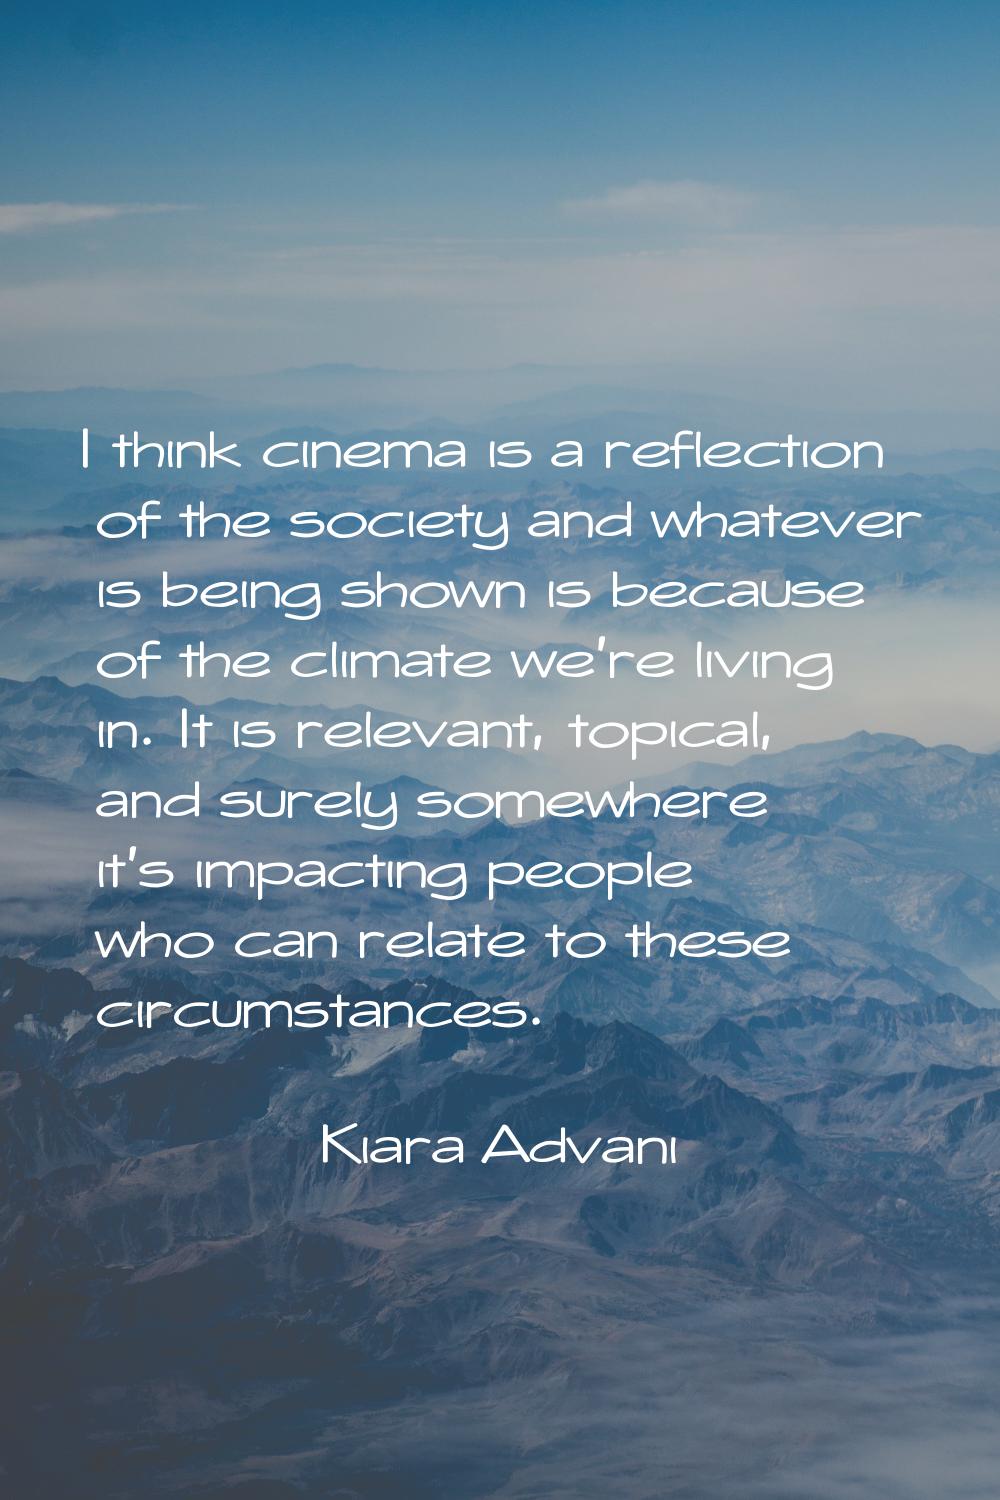 I think cinema is a reflection of the society and whatever is being shown is because of the climate